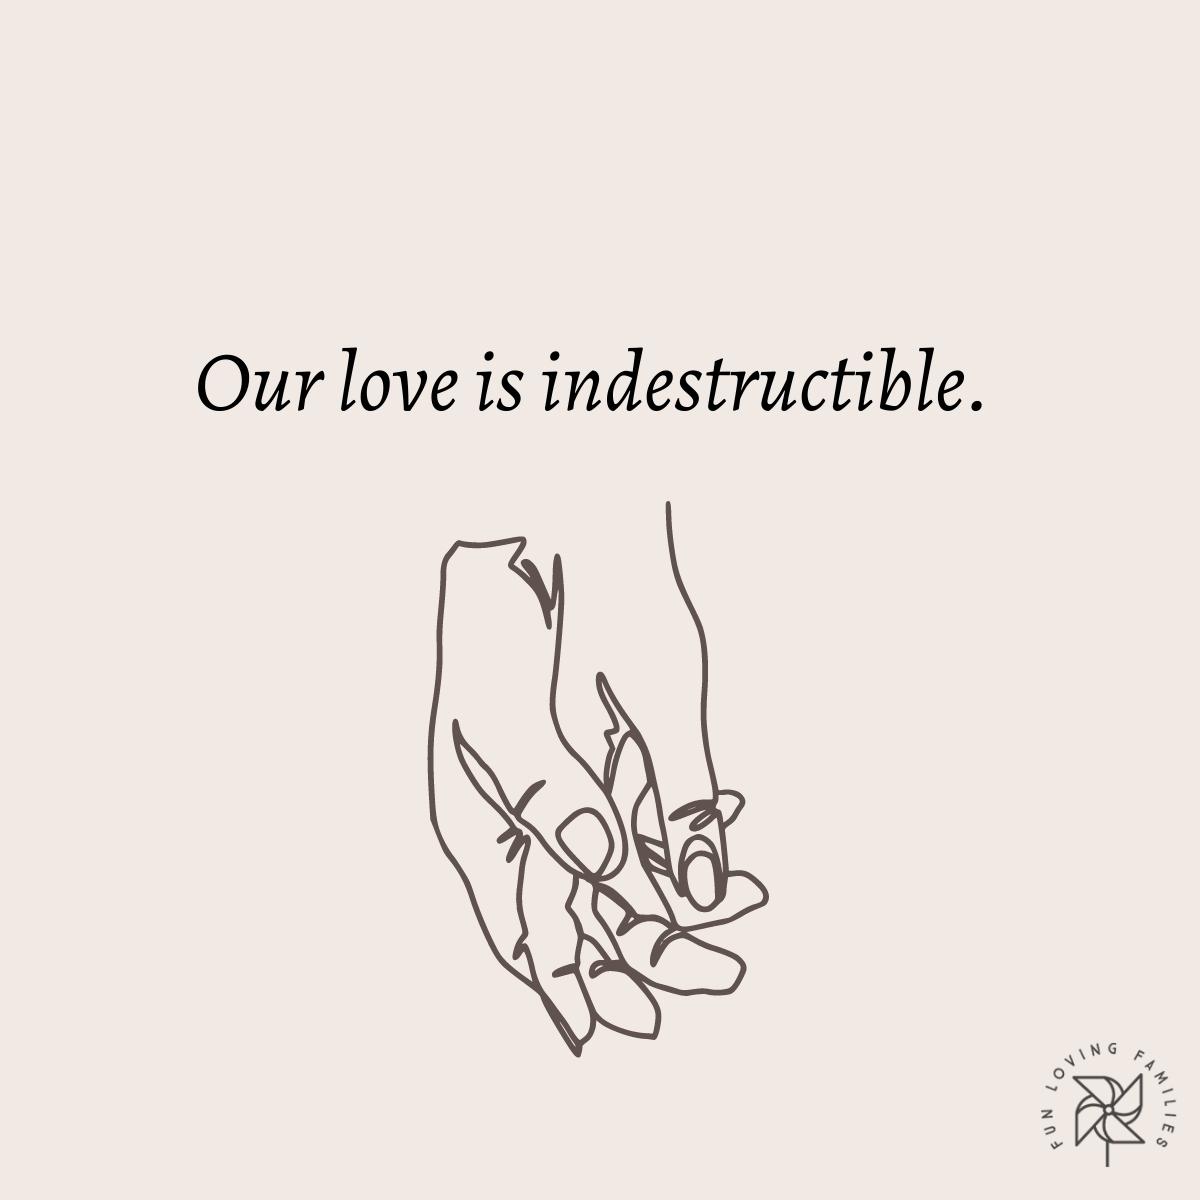 Our love is indestructible affirmation image